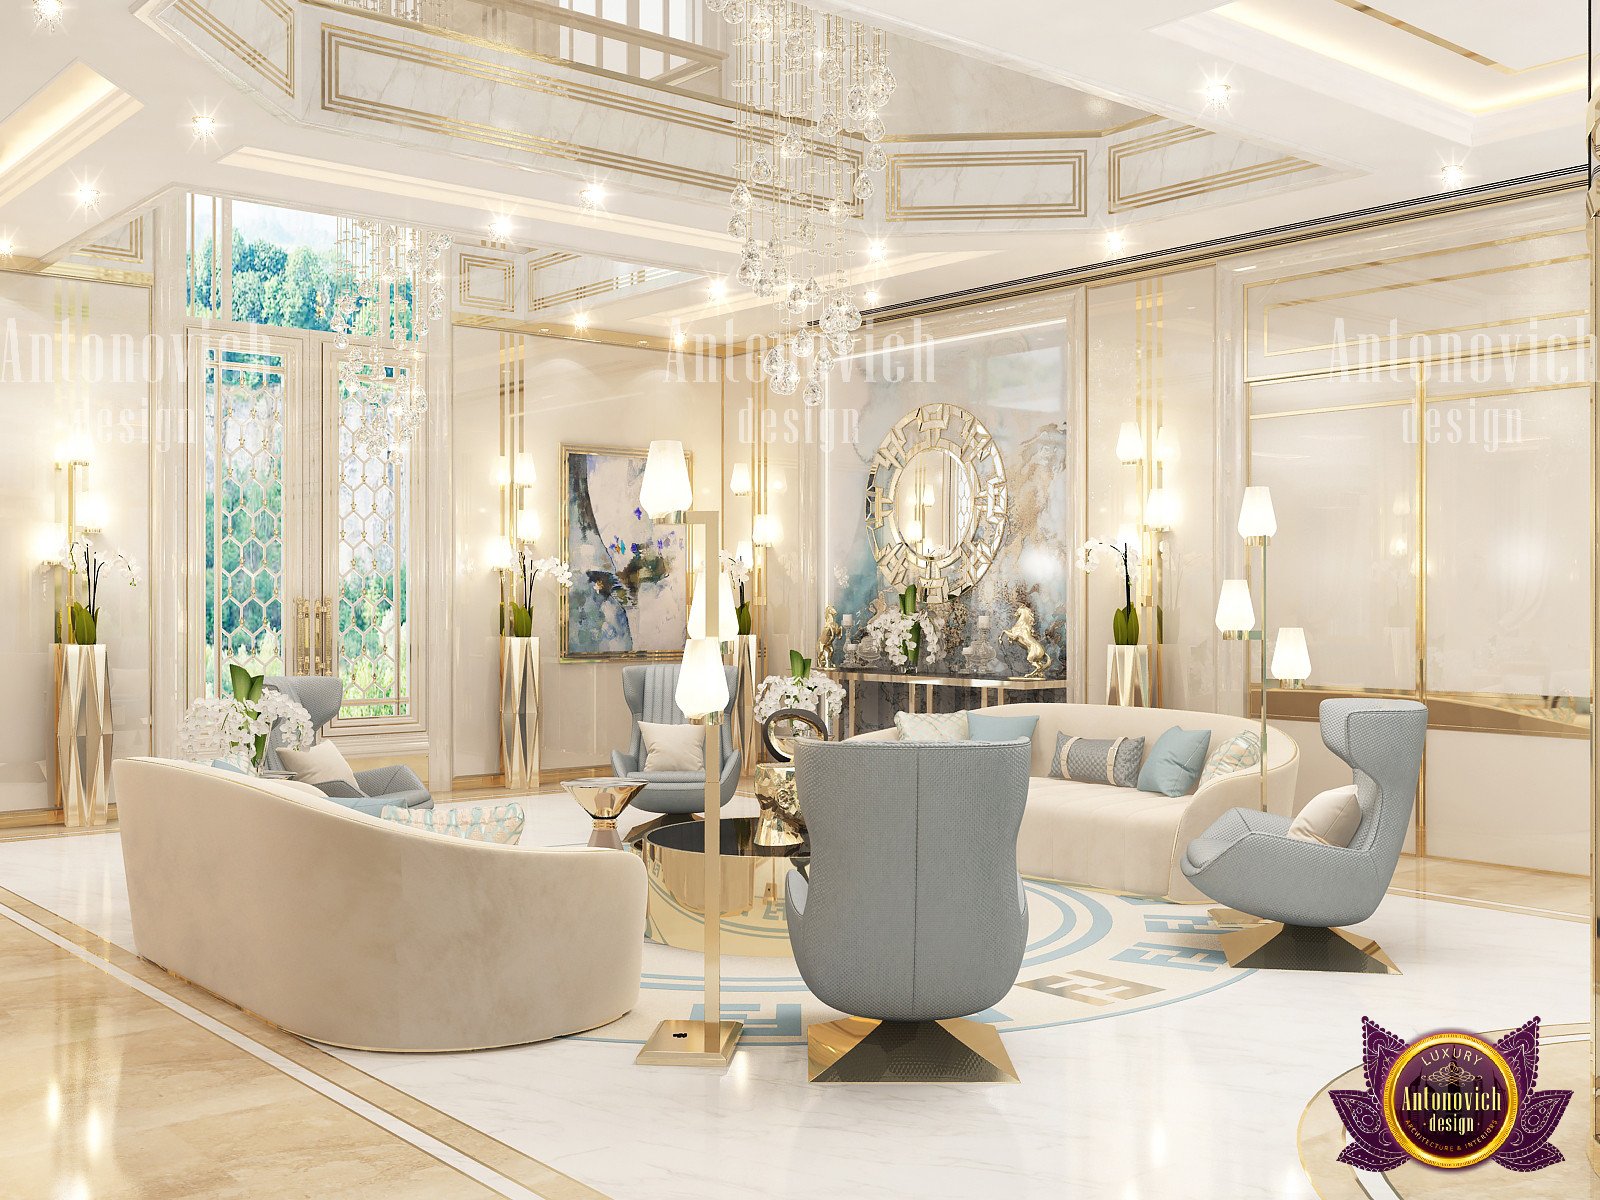 Discover Your Dream Custom Luxury Home Interior Today!